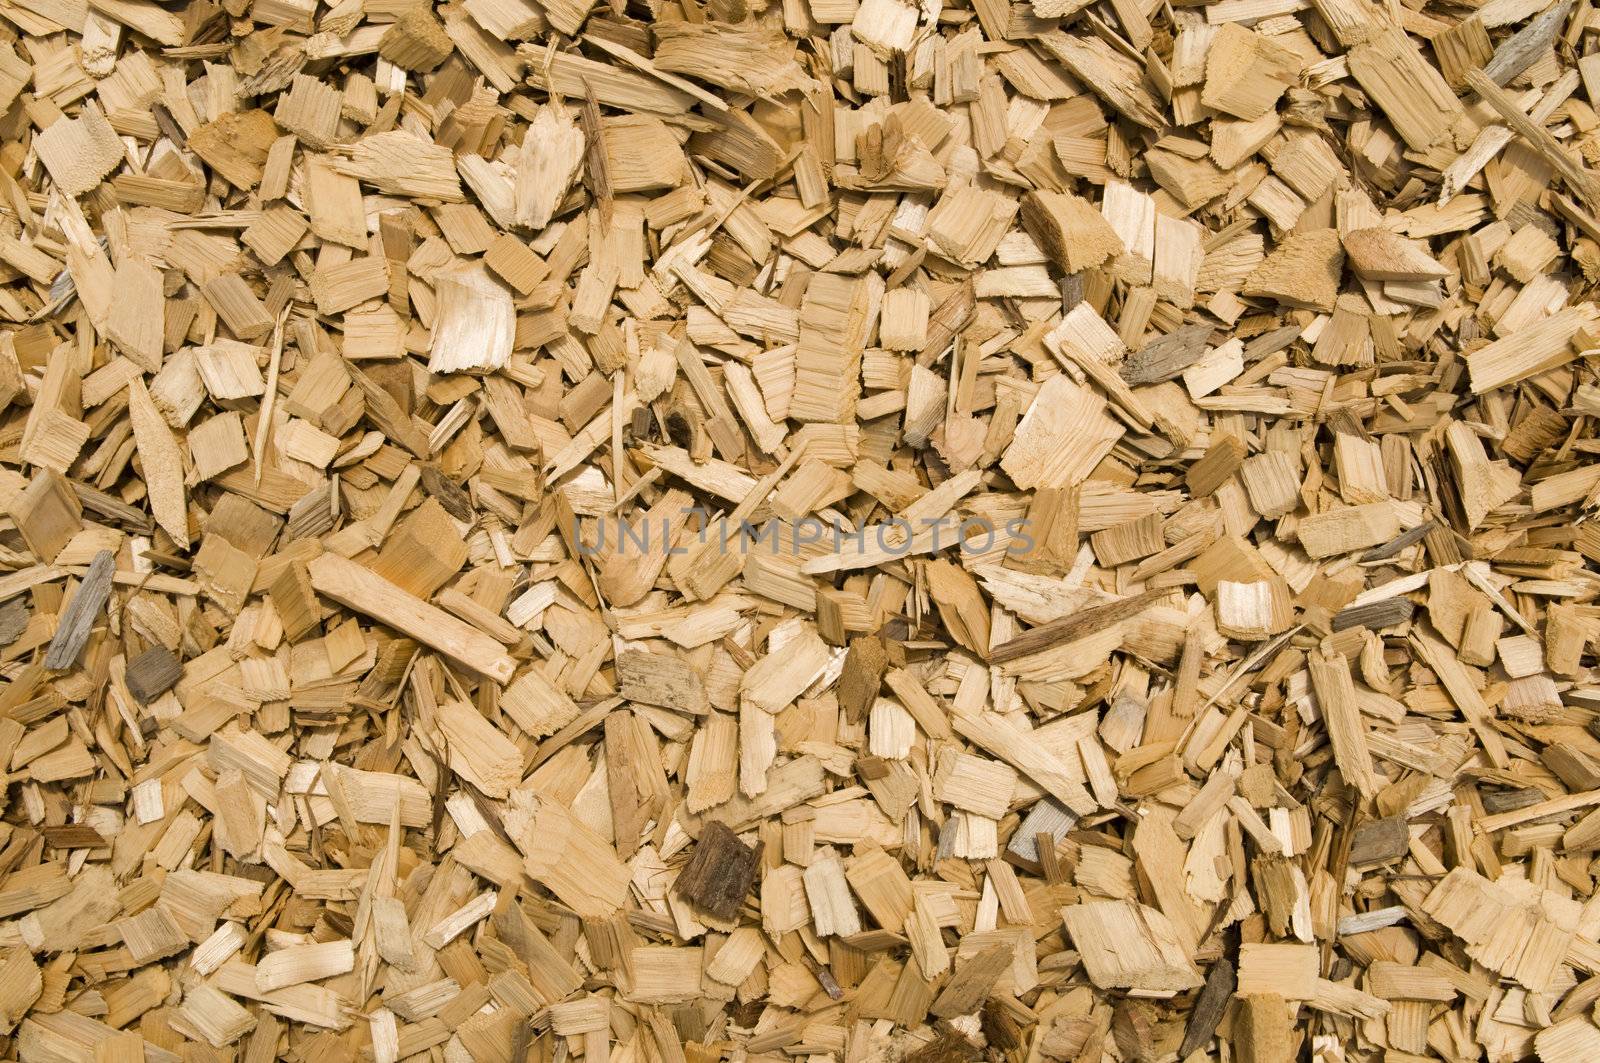 Wood chip background, used in playground area